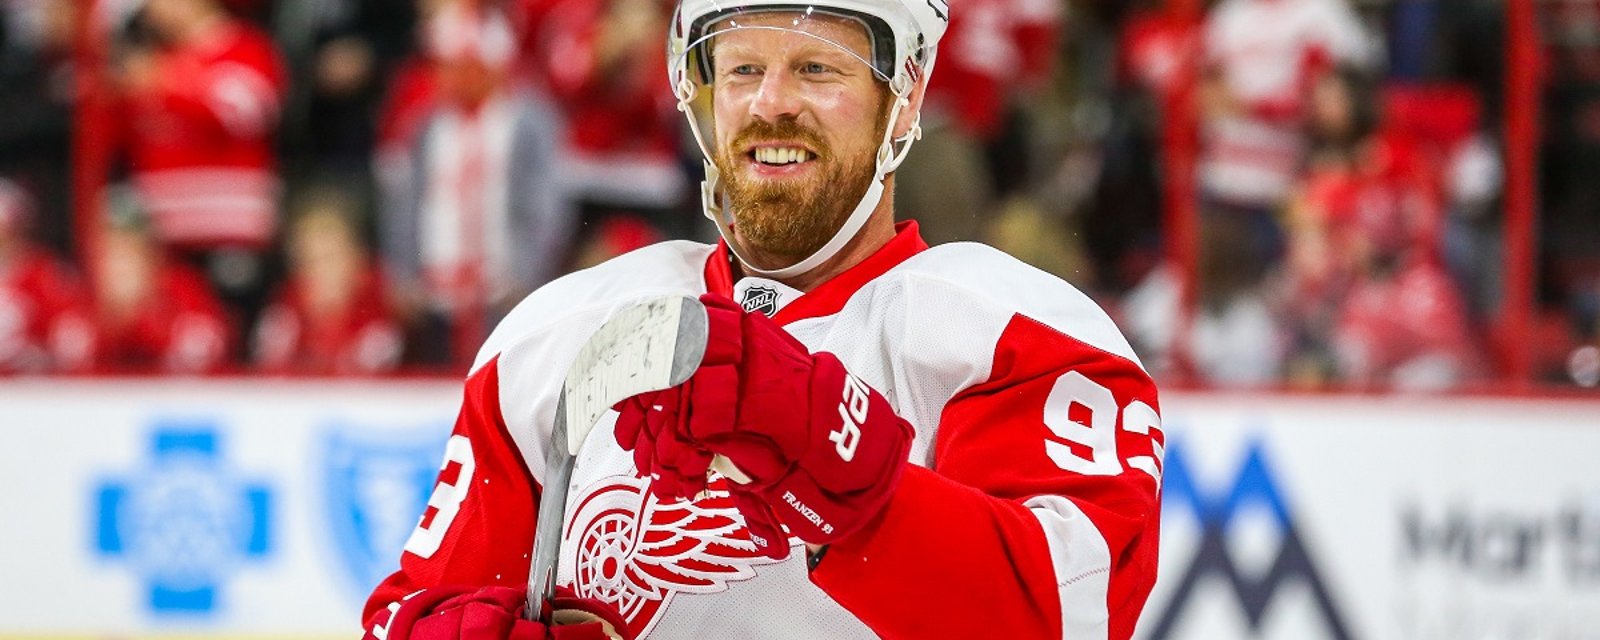 Red Wings star Johan Franzen provides a tragic update on his life.